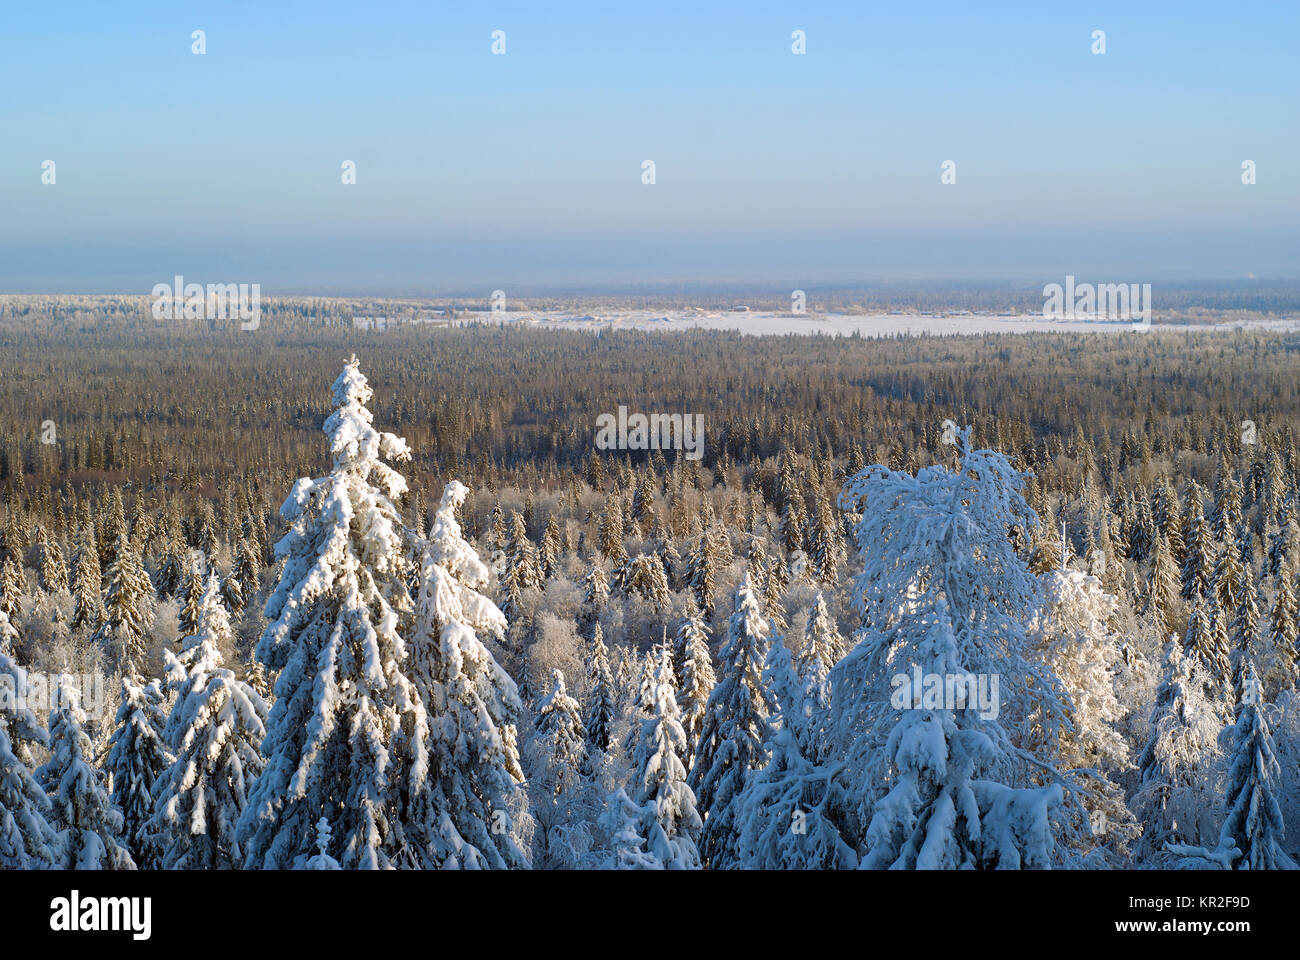 View from the top of the mountain to the winter coniferous forest to the horizon on a clear frosty day with snow-covered trees in the foreground Stock Photo